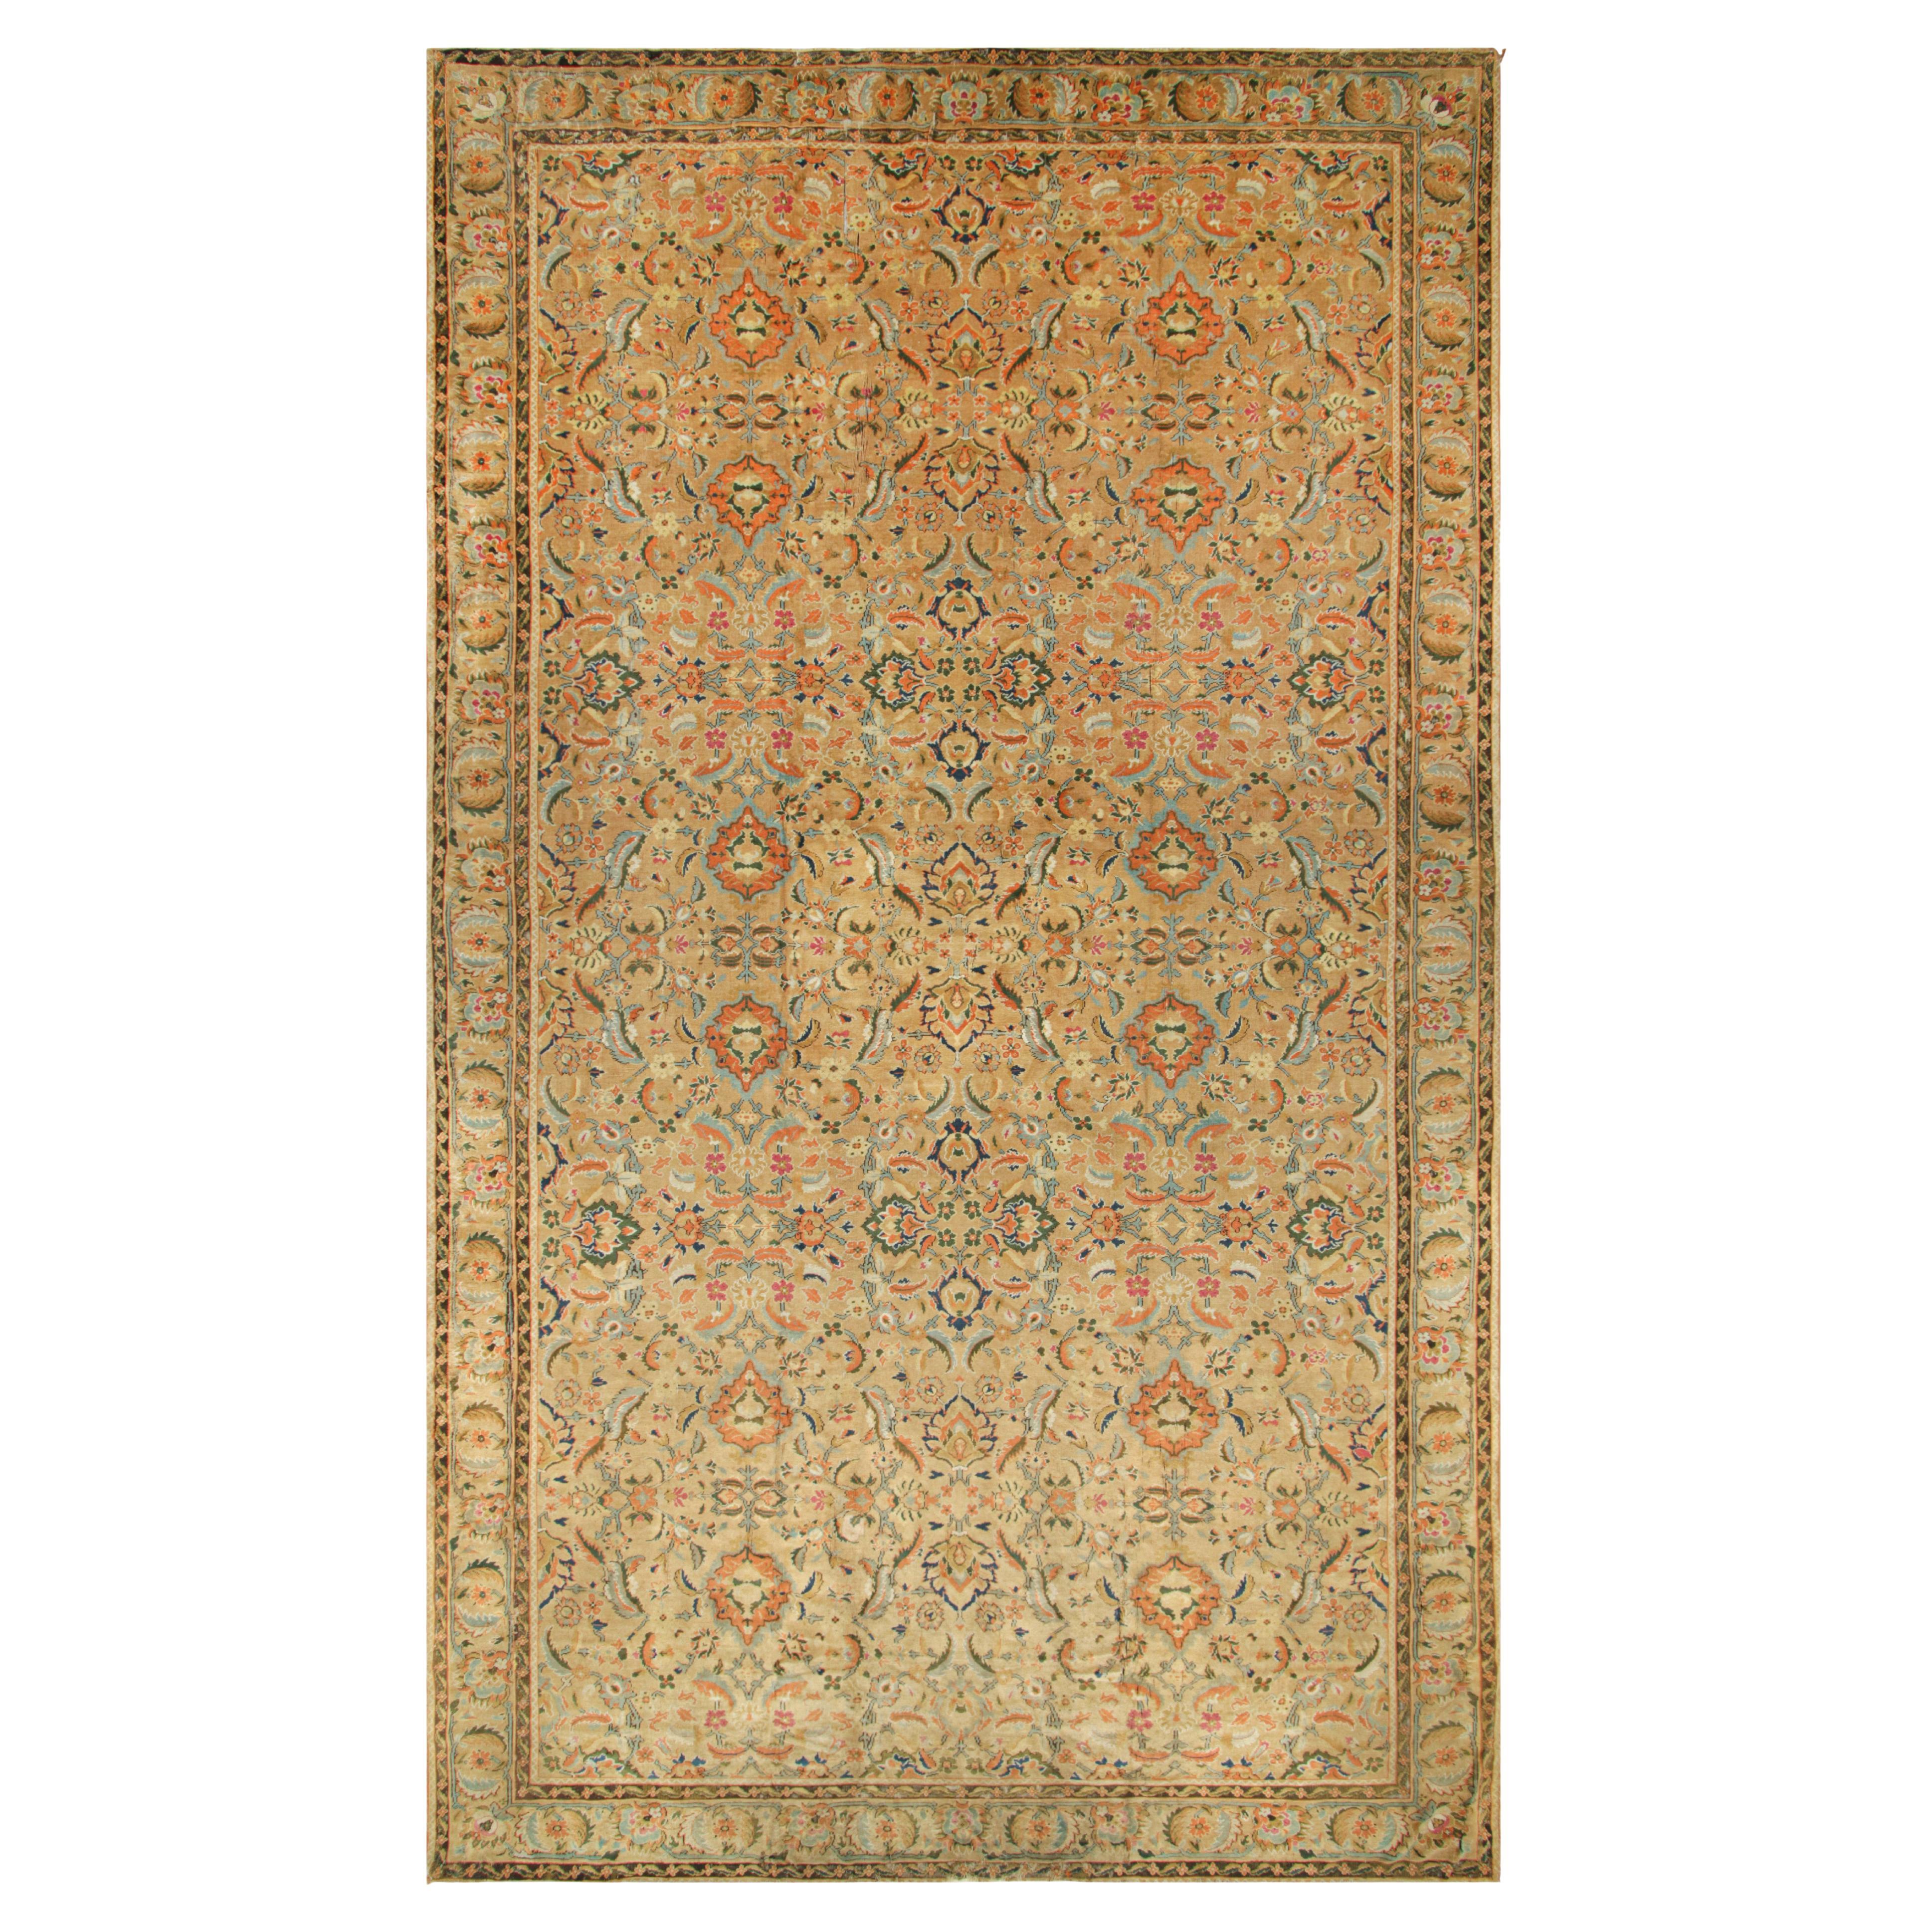 Oversized Antique Axminster Rug in Camel with Floral Patterns For Sale